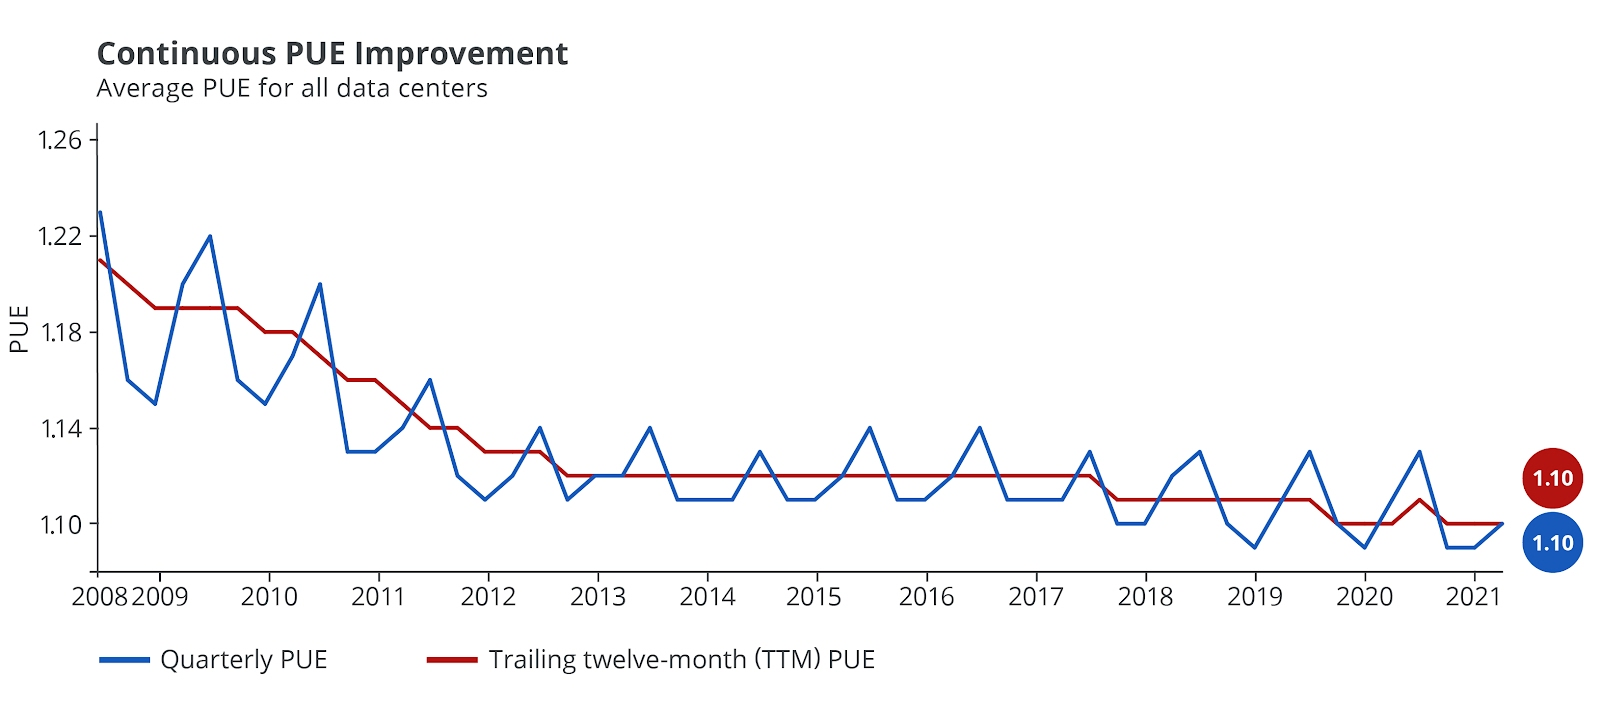 Continuous PUE Improvement - Google data centers average power usage significantly reduced since 2008.